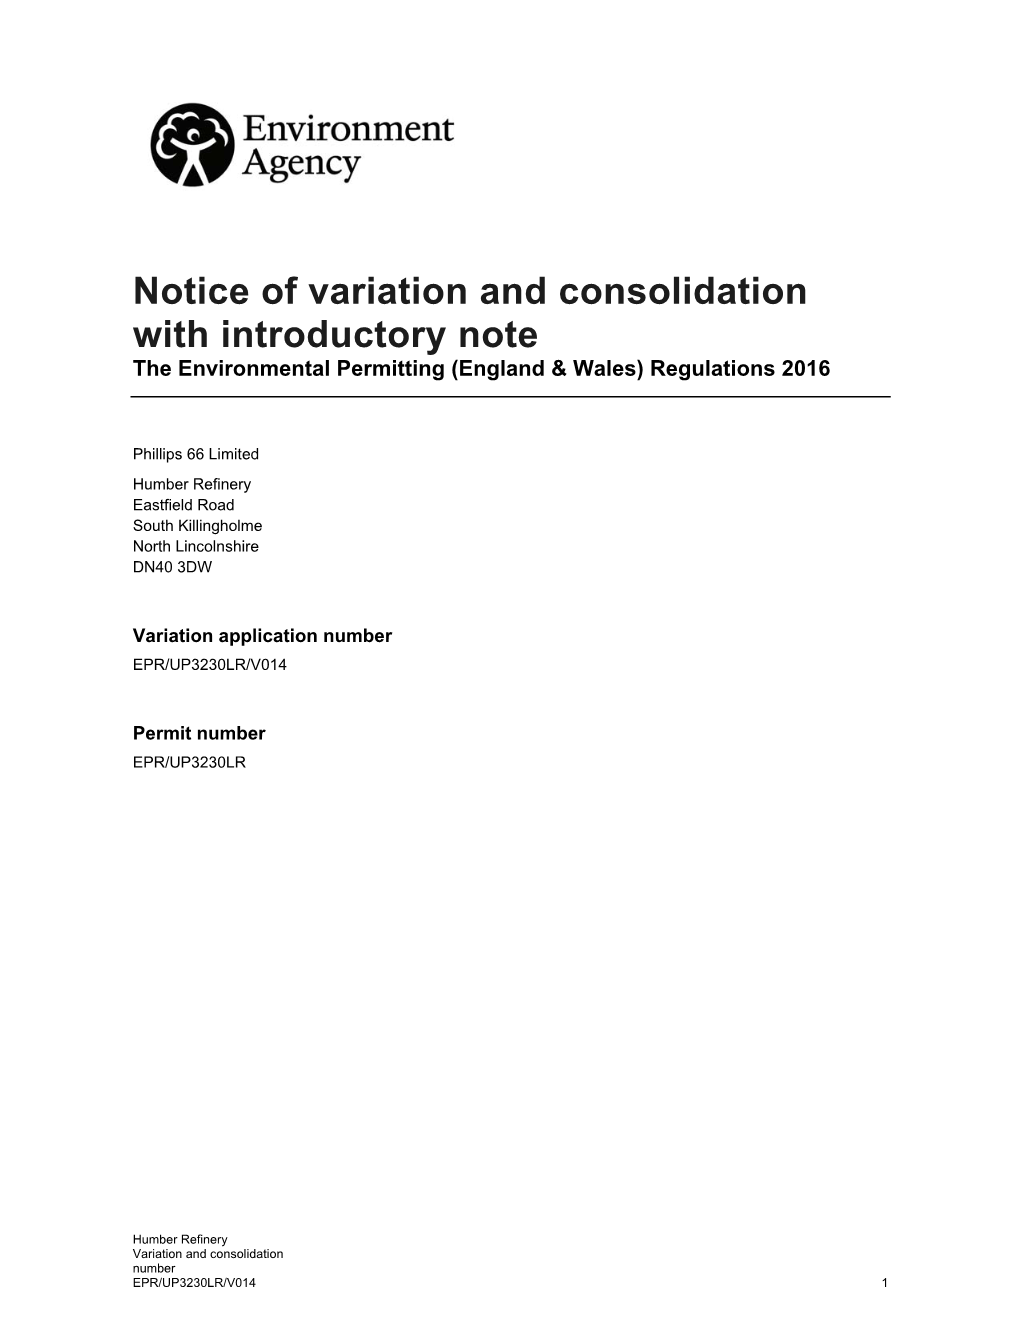 Notice of Variation and Consolidation with Introductory Note the Environmental Permitting (England & Wales) Regulations 2016